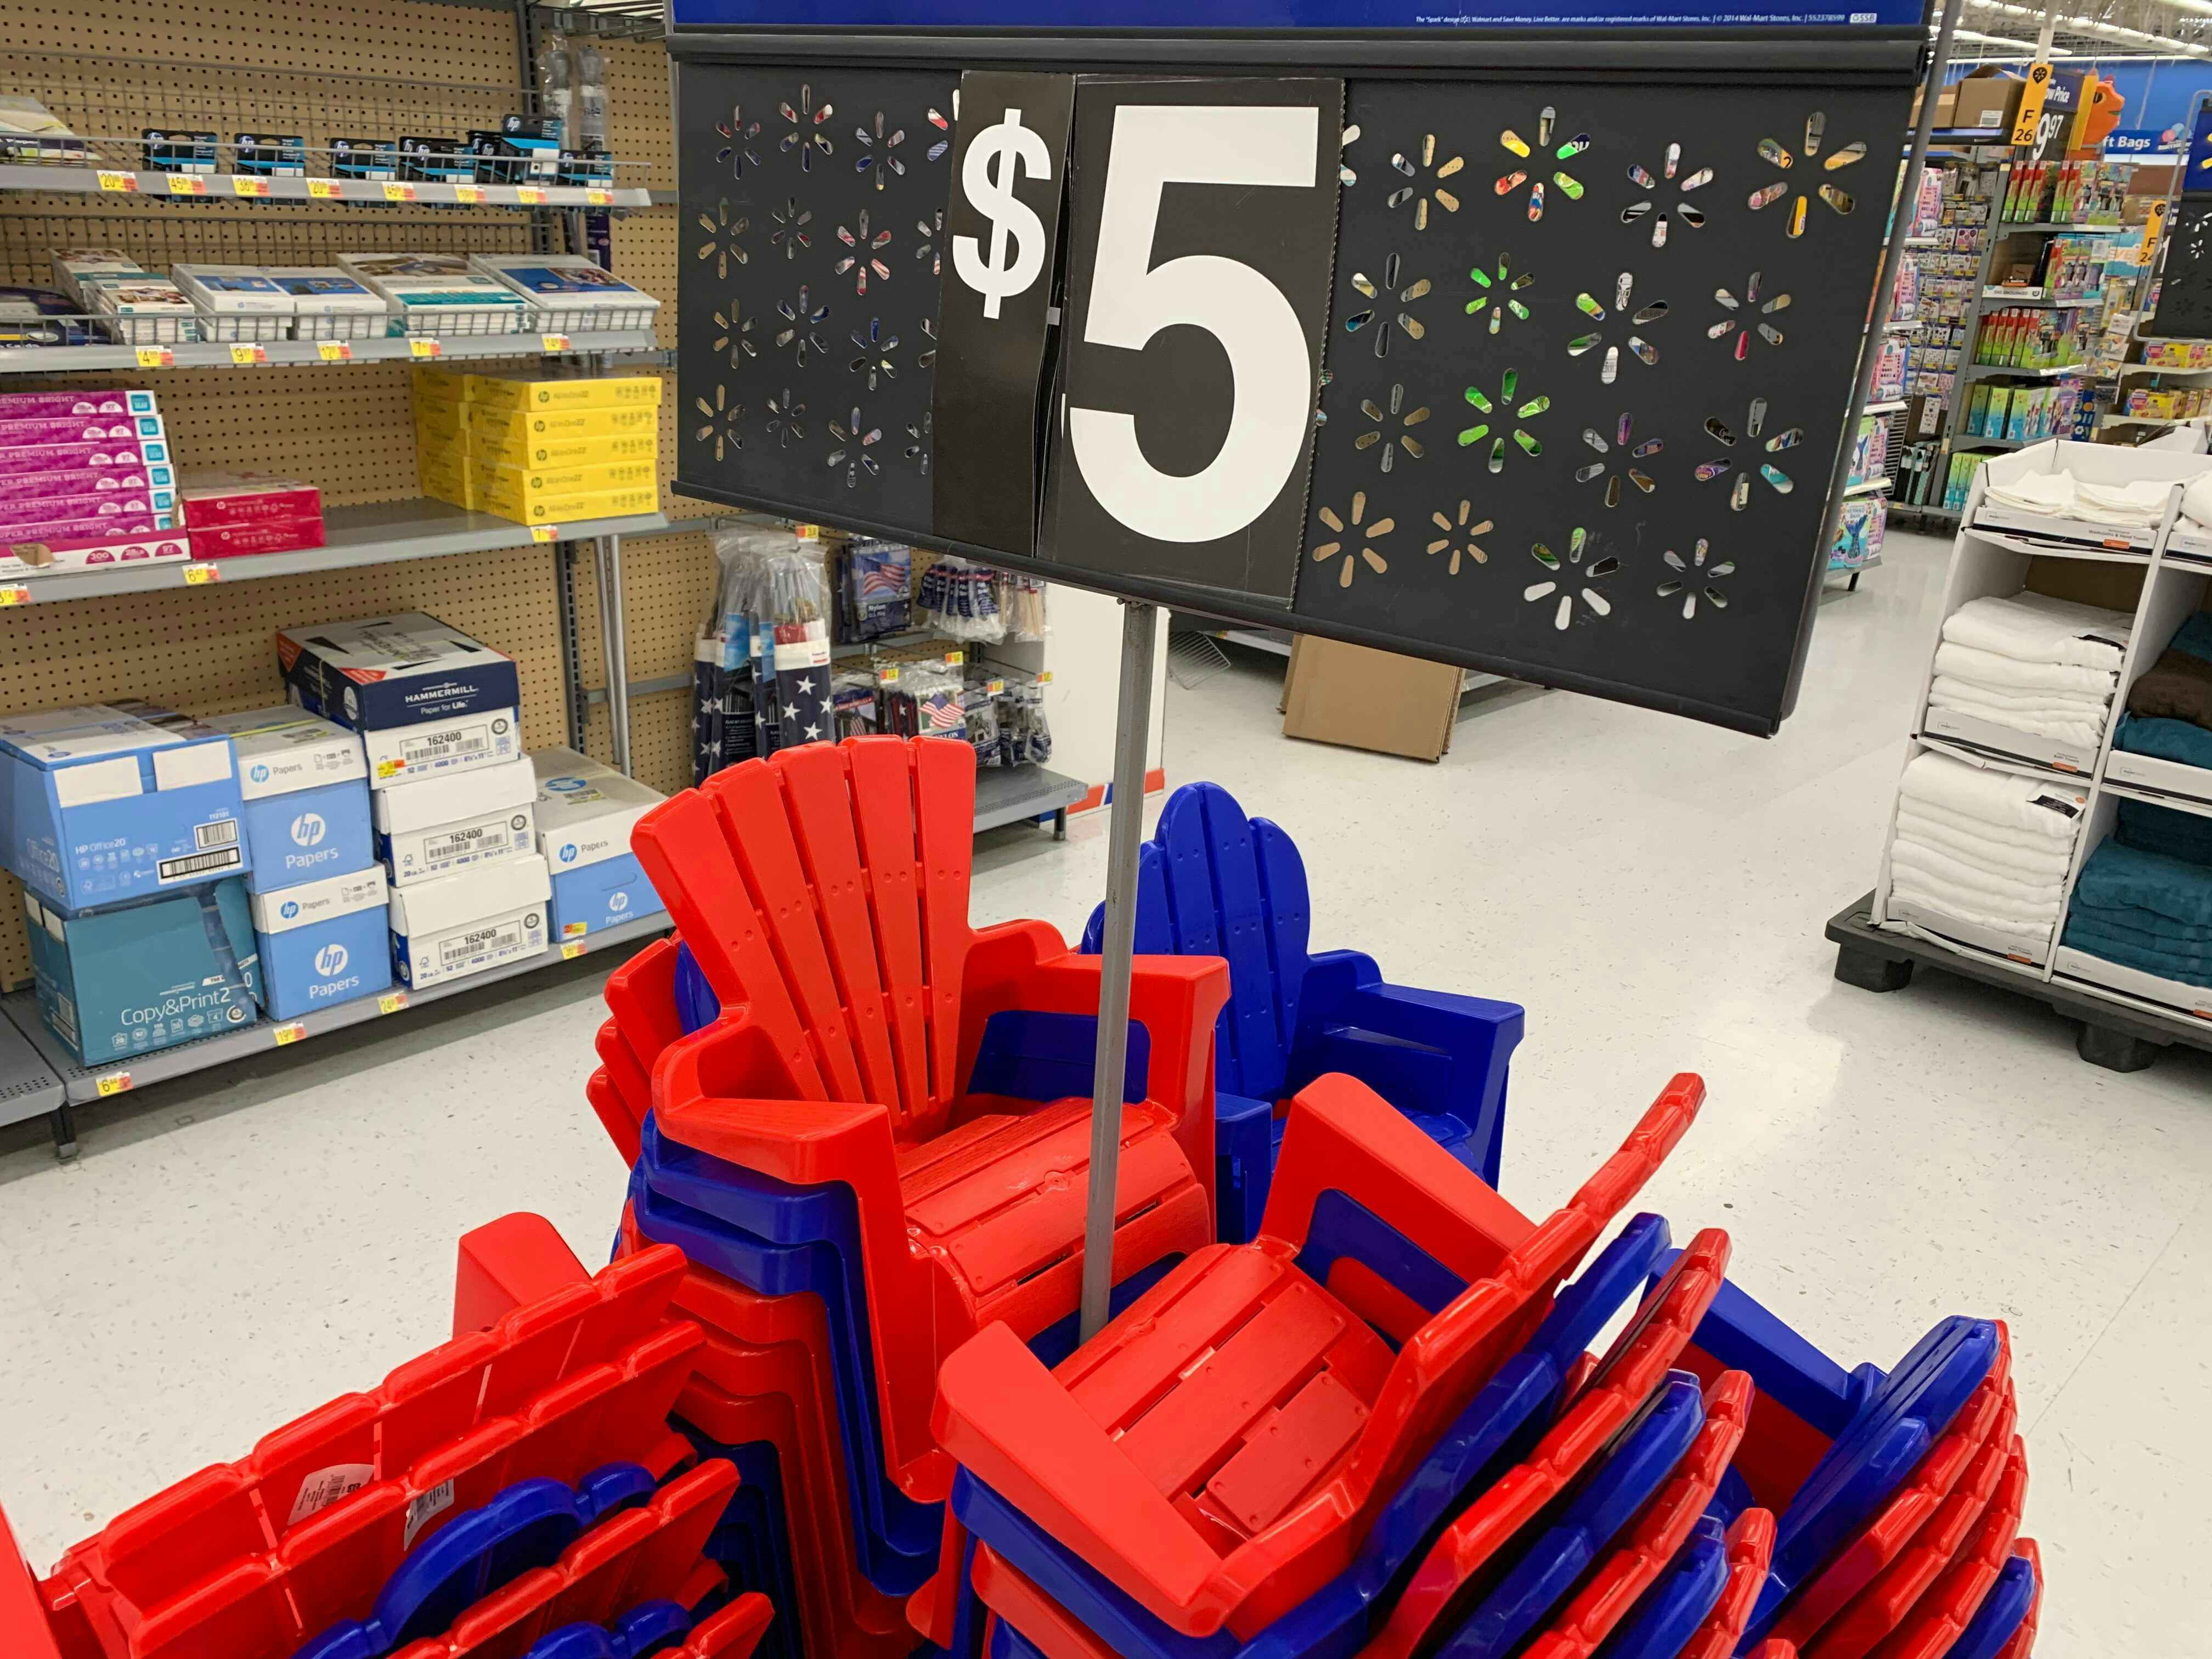 kids plastic red and blue adirondak chairs stacked around a $5 everyday low price at walmart